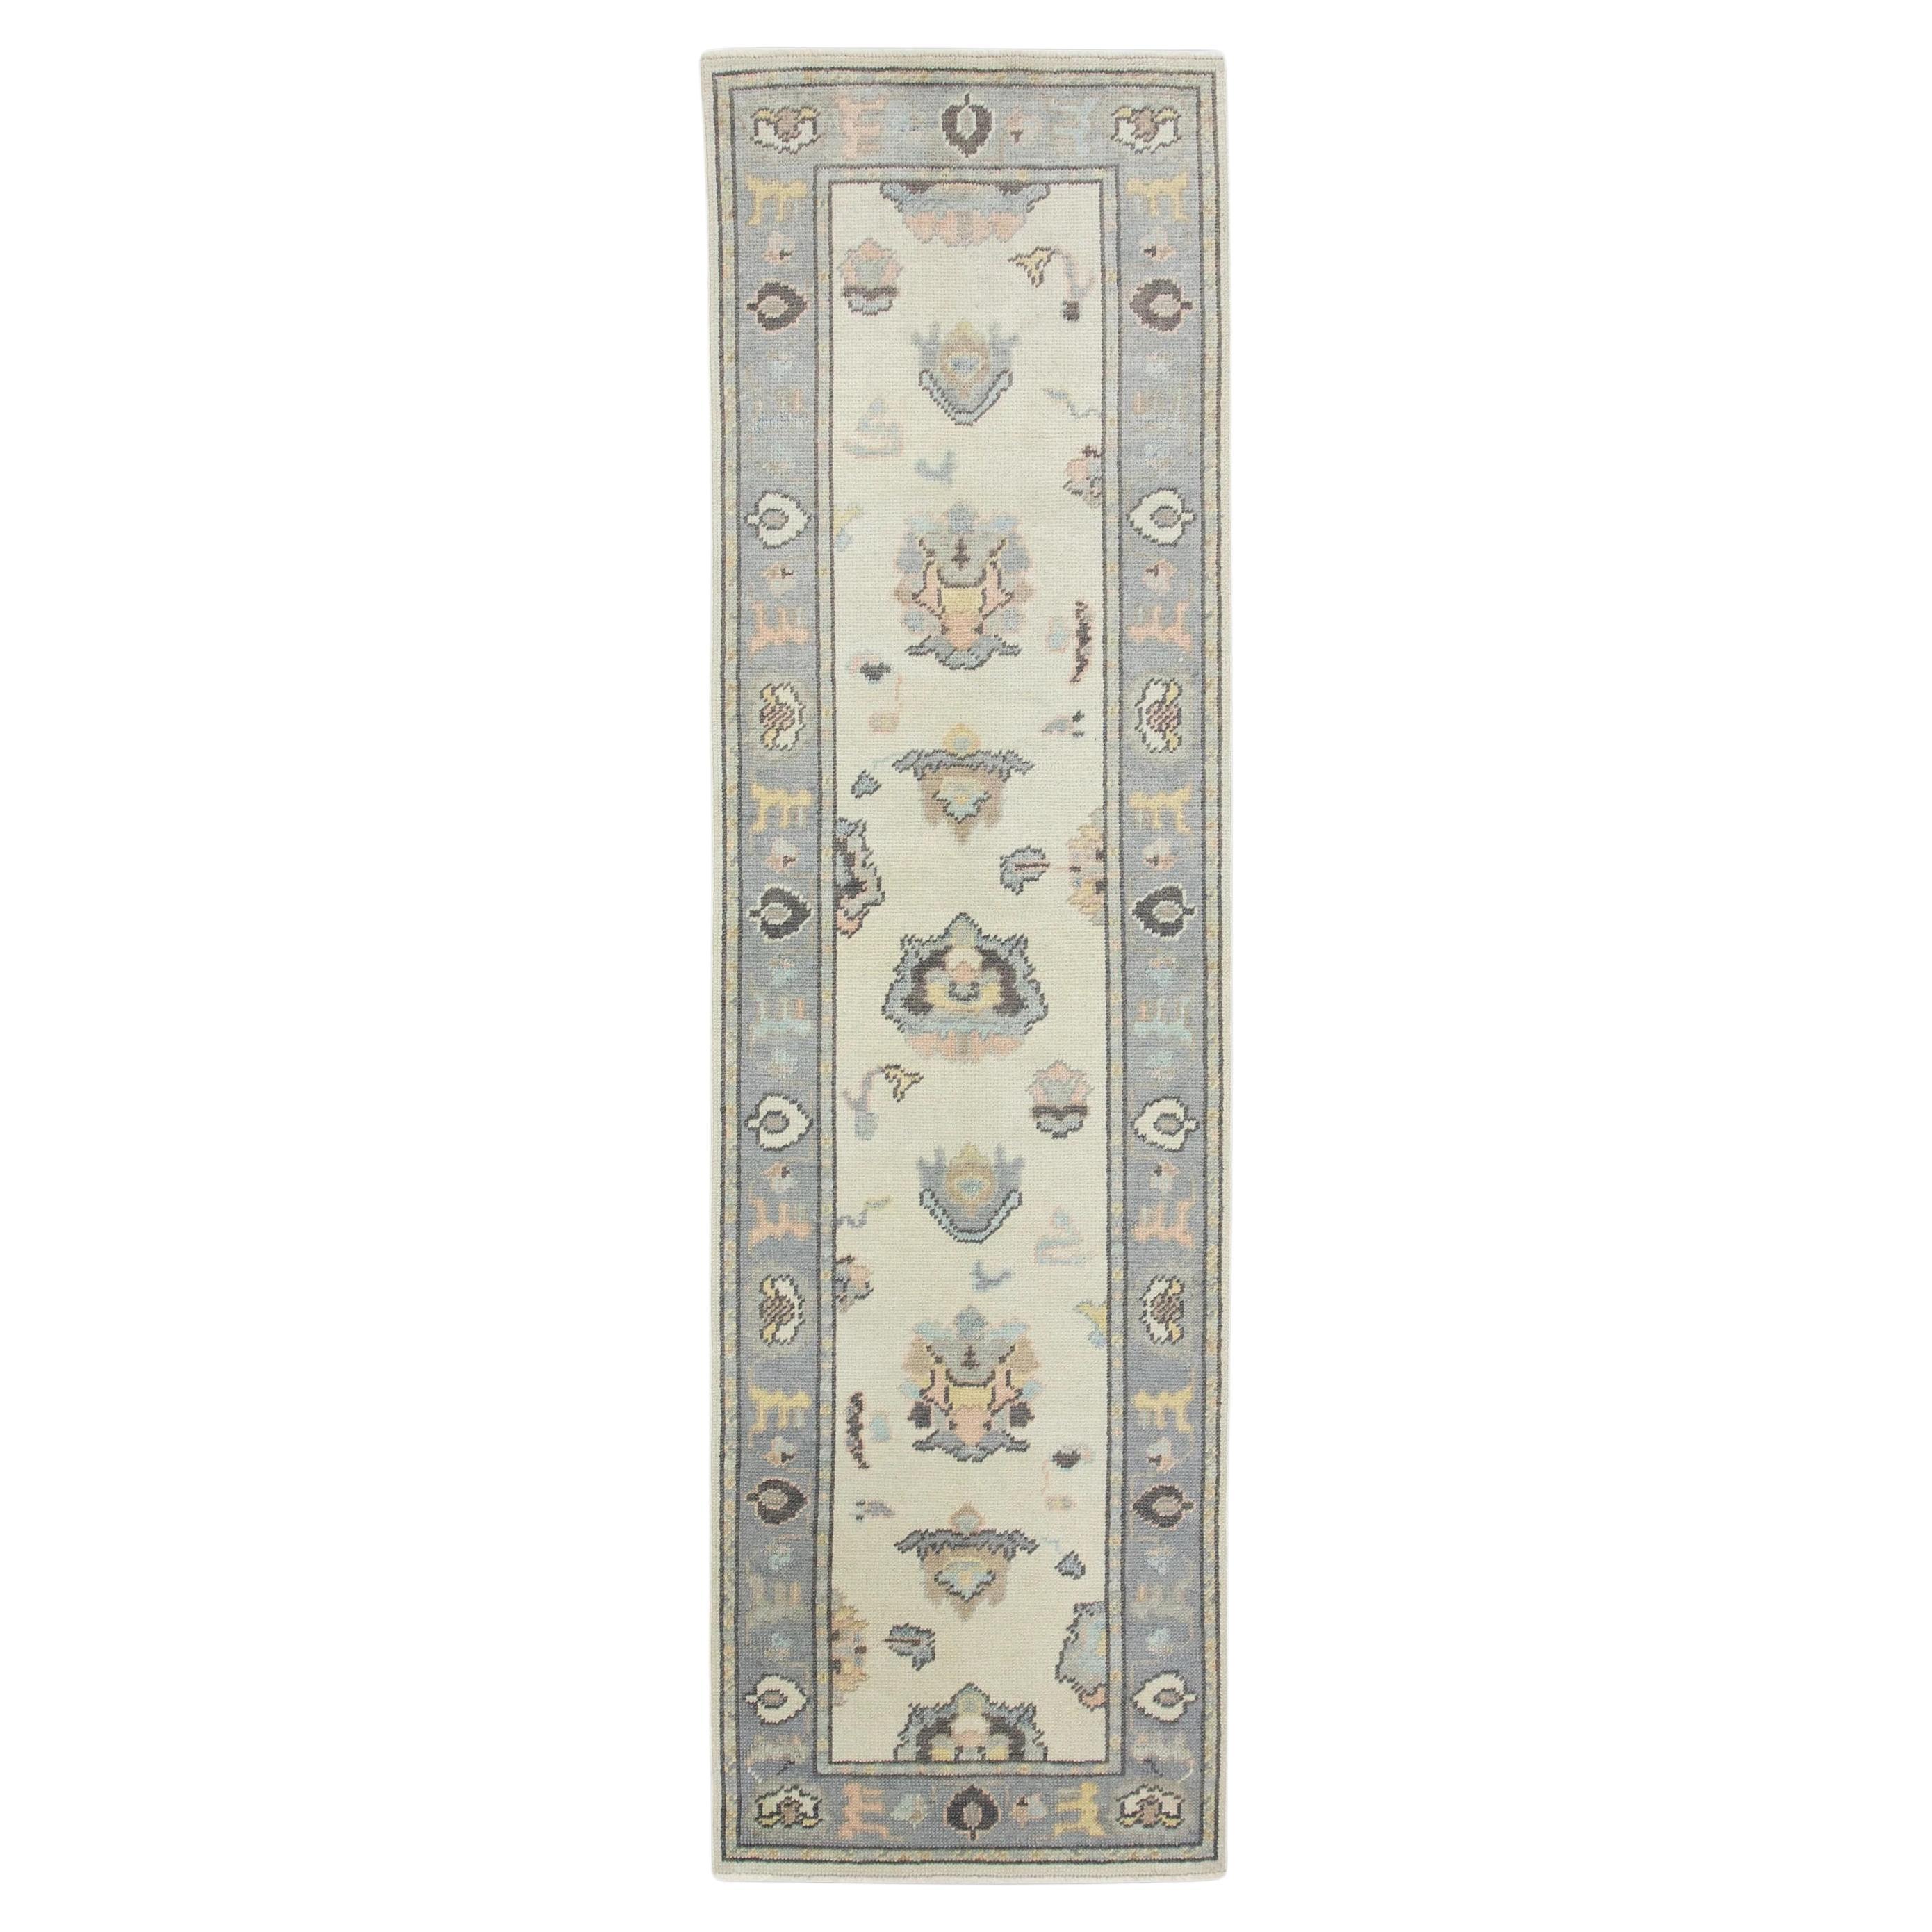 Cream Handwoven Wool Turkish Oushak Rug in Multicolor Floral Design 2'6" x 8'7" For Sale